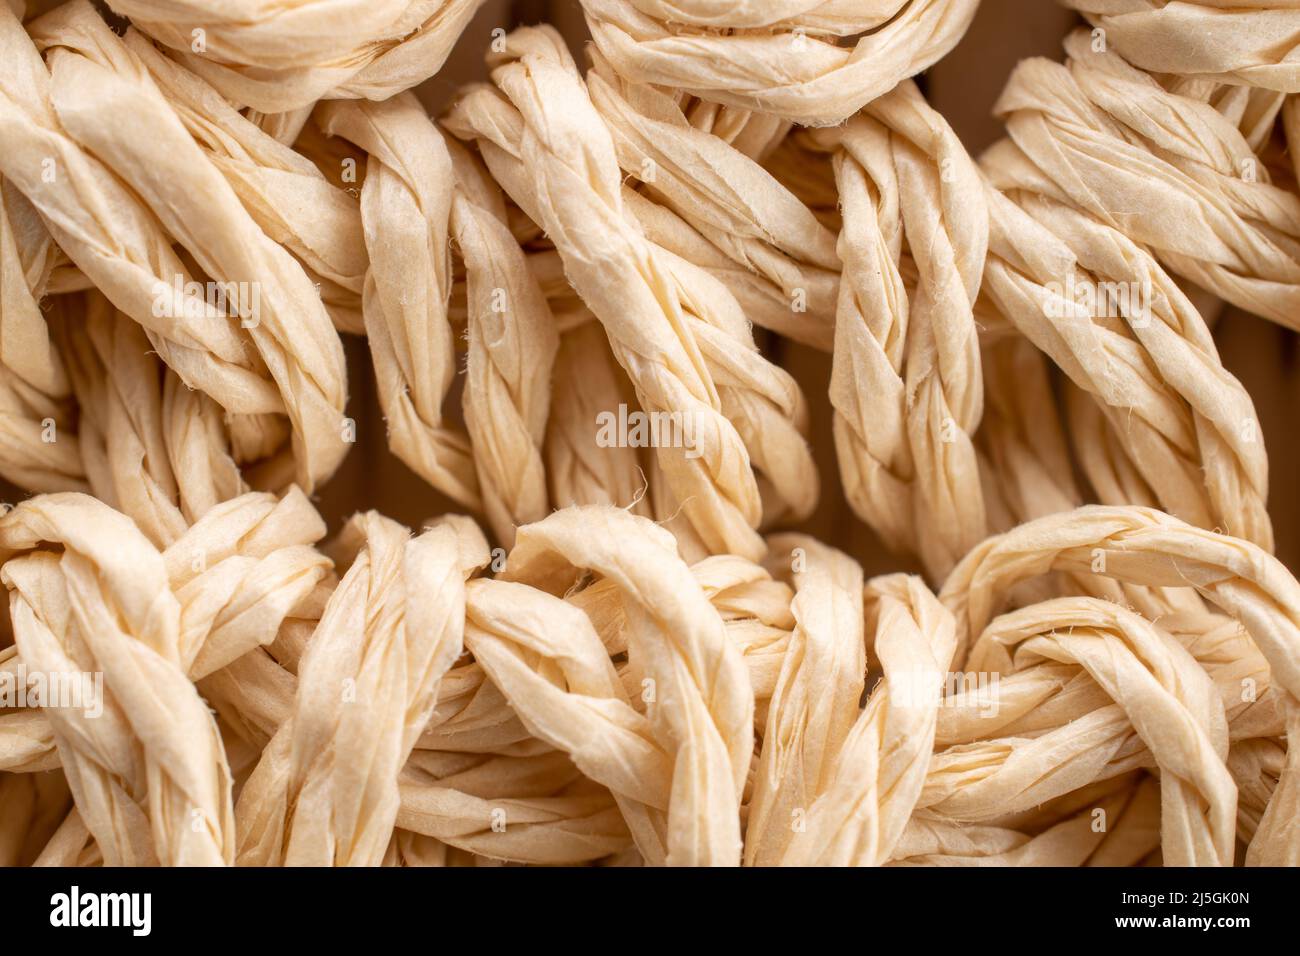 Wicker straw mat, close-up, top view. Stock Photo